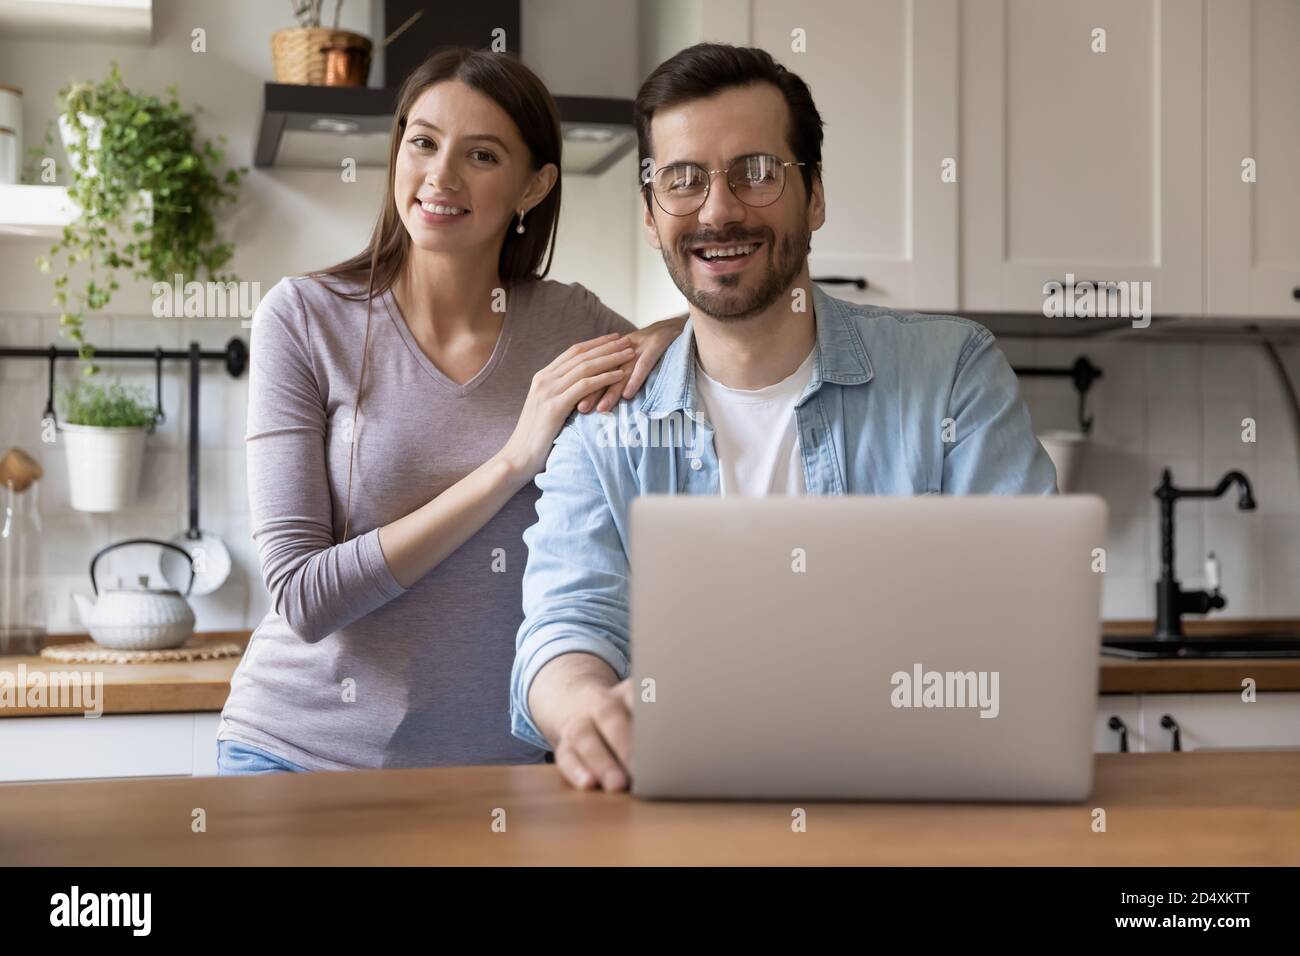 Happy millennial married family couple using computer. Stock Photo